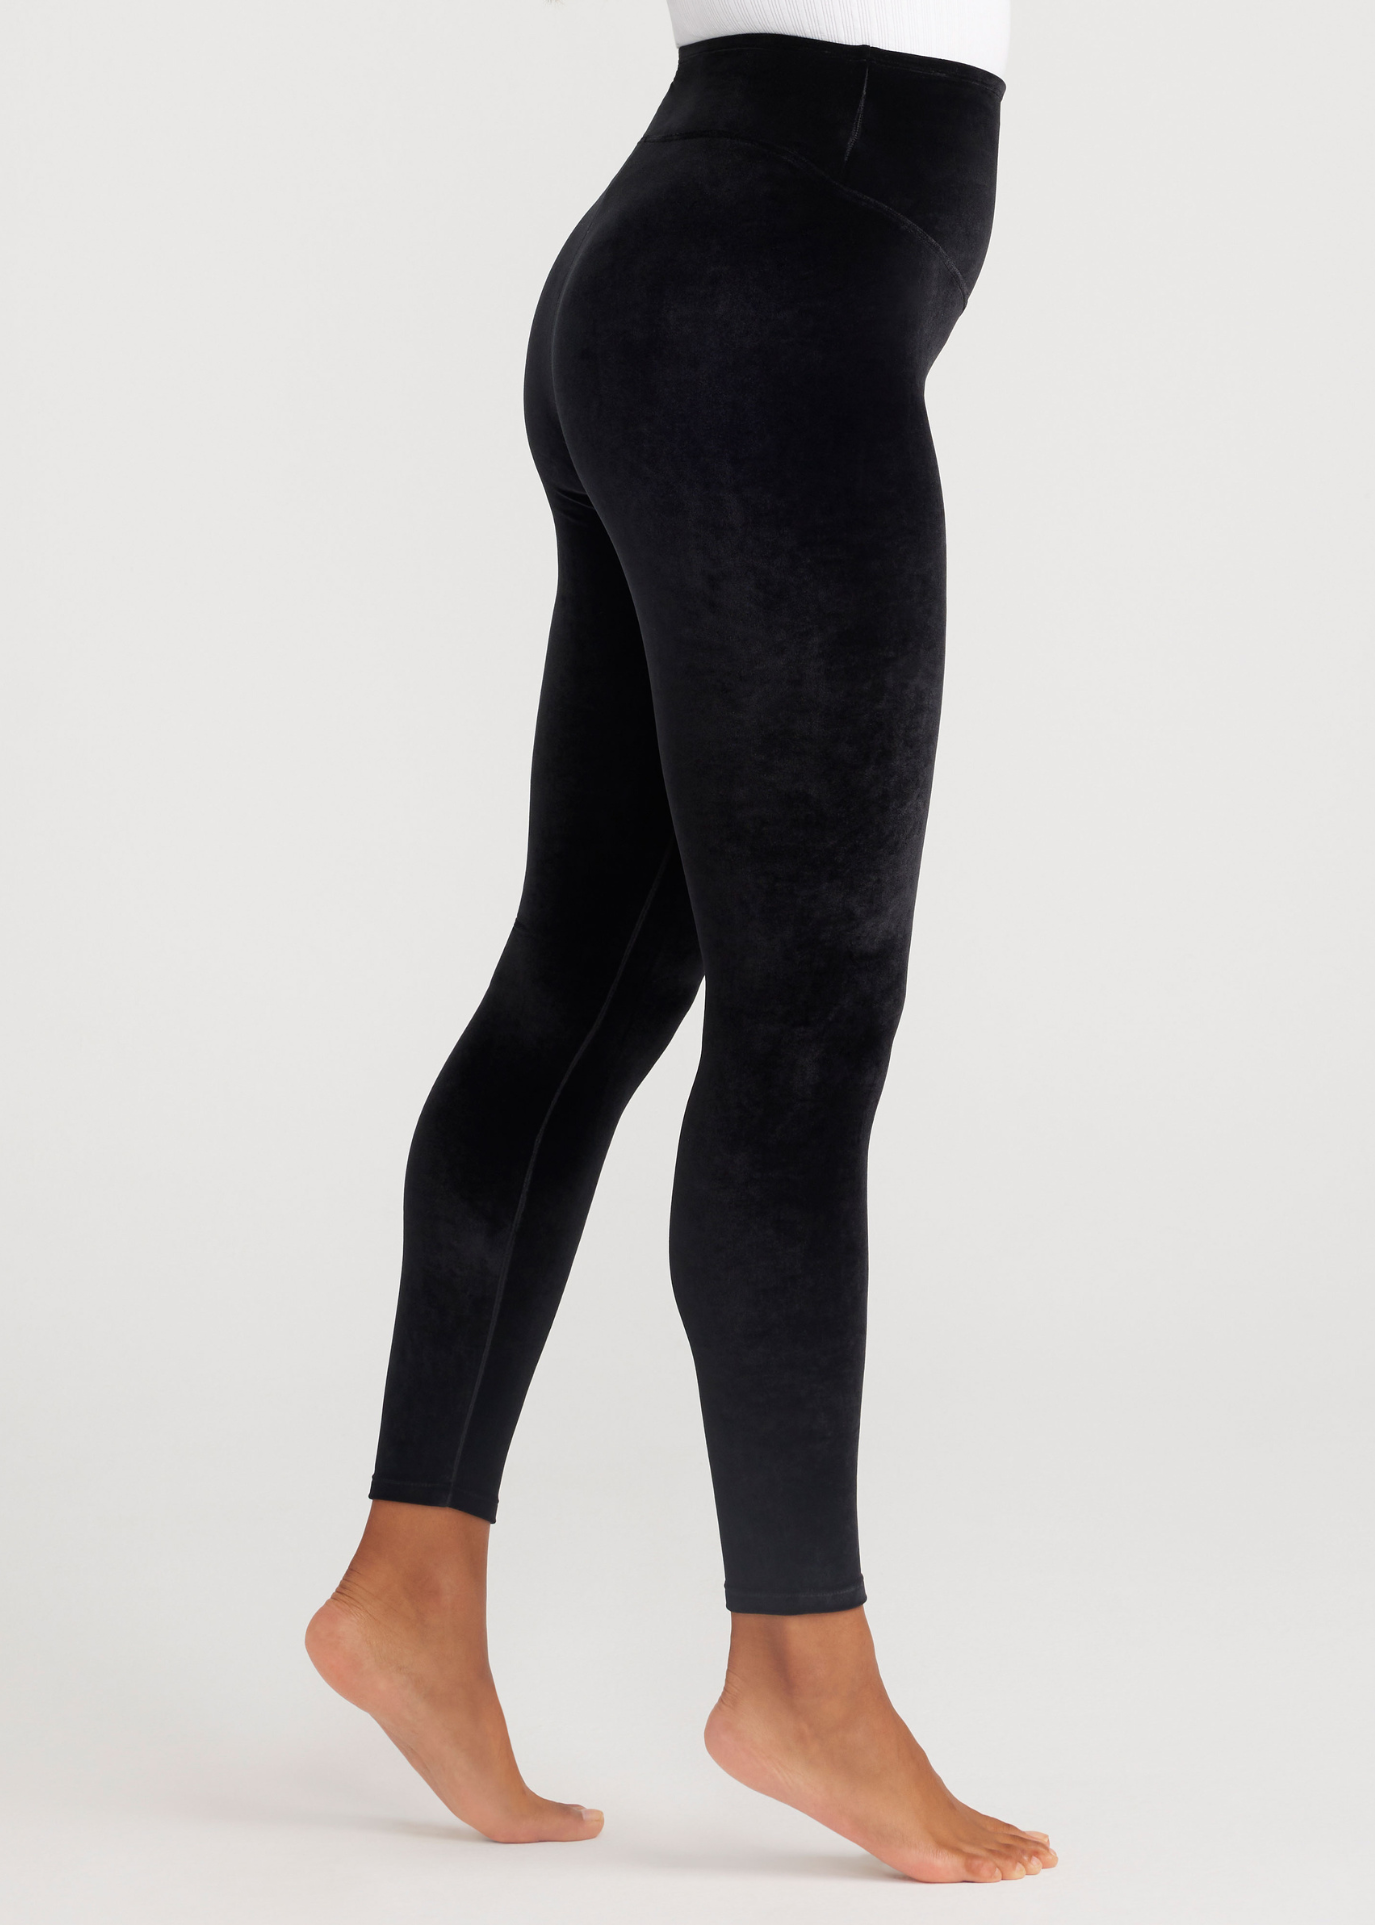 Yummie Shapewear Leggings, Meet 's $14 Bestselling Leggings — and 12  More Cosy, Comfy Options You'll Love